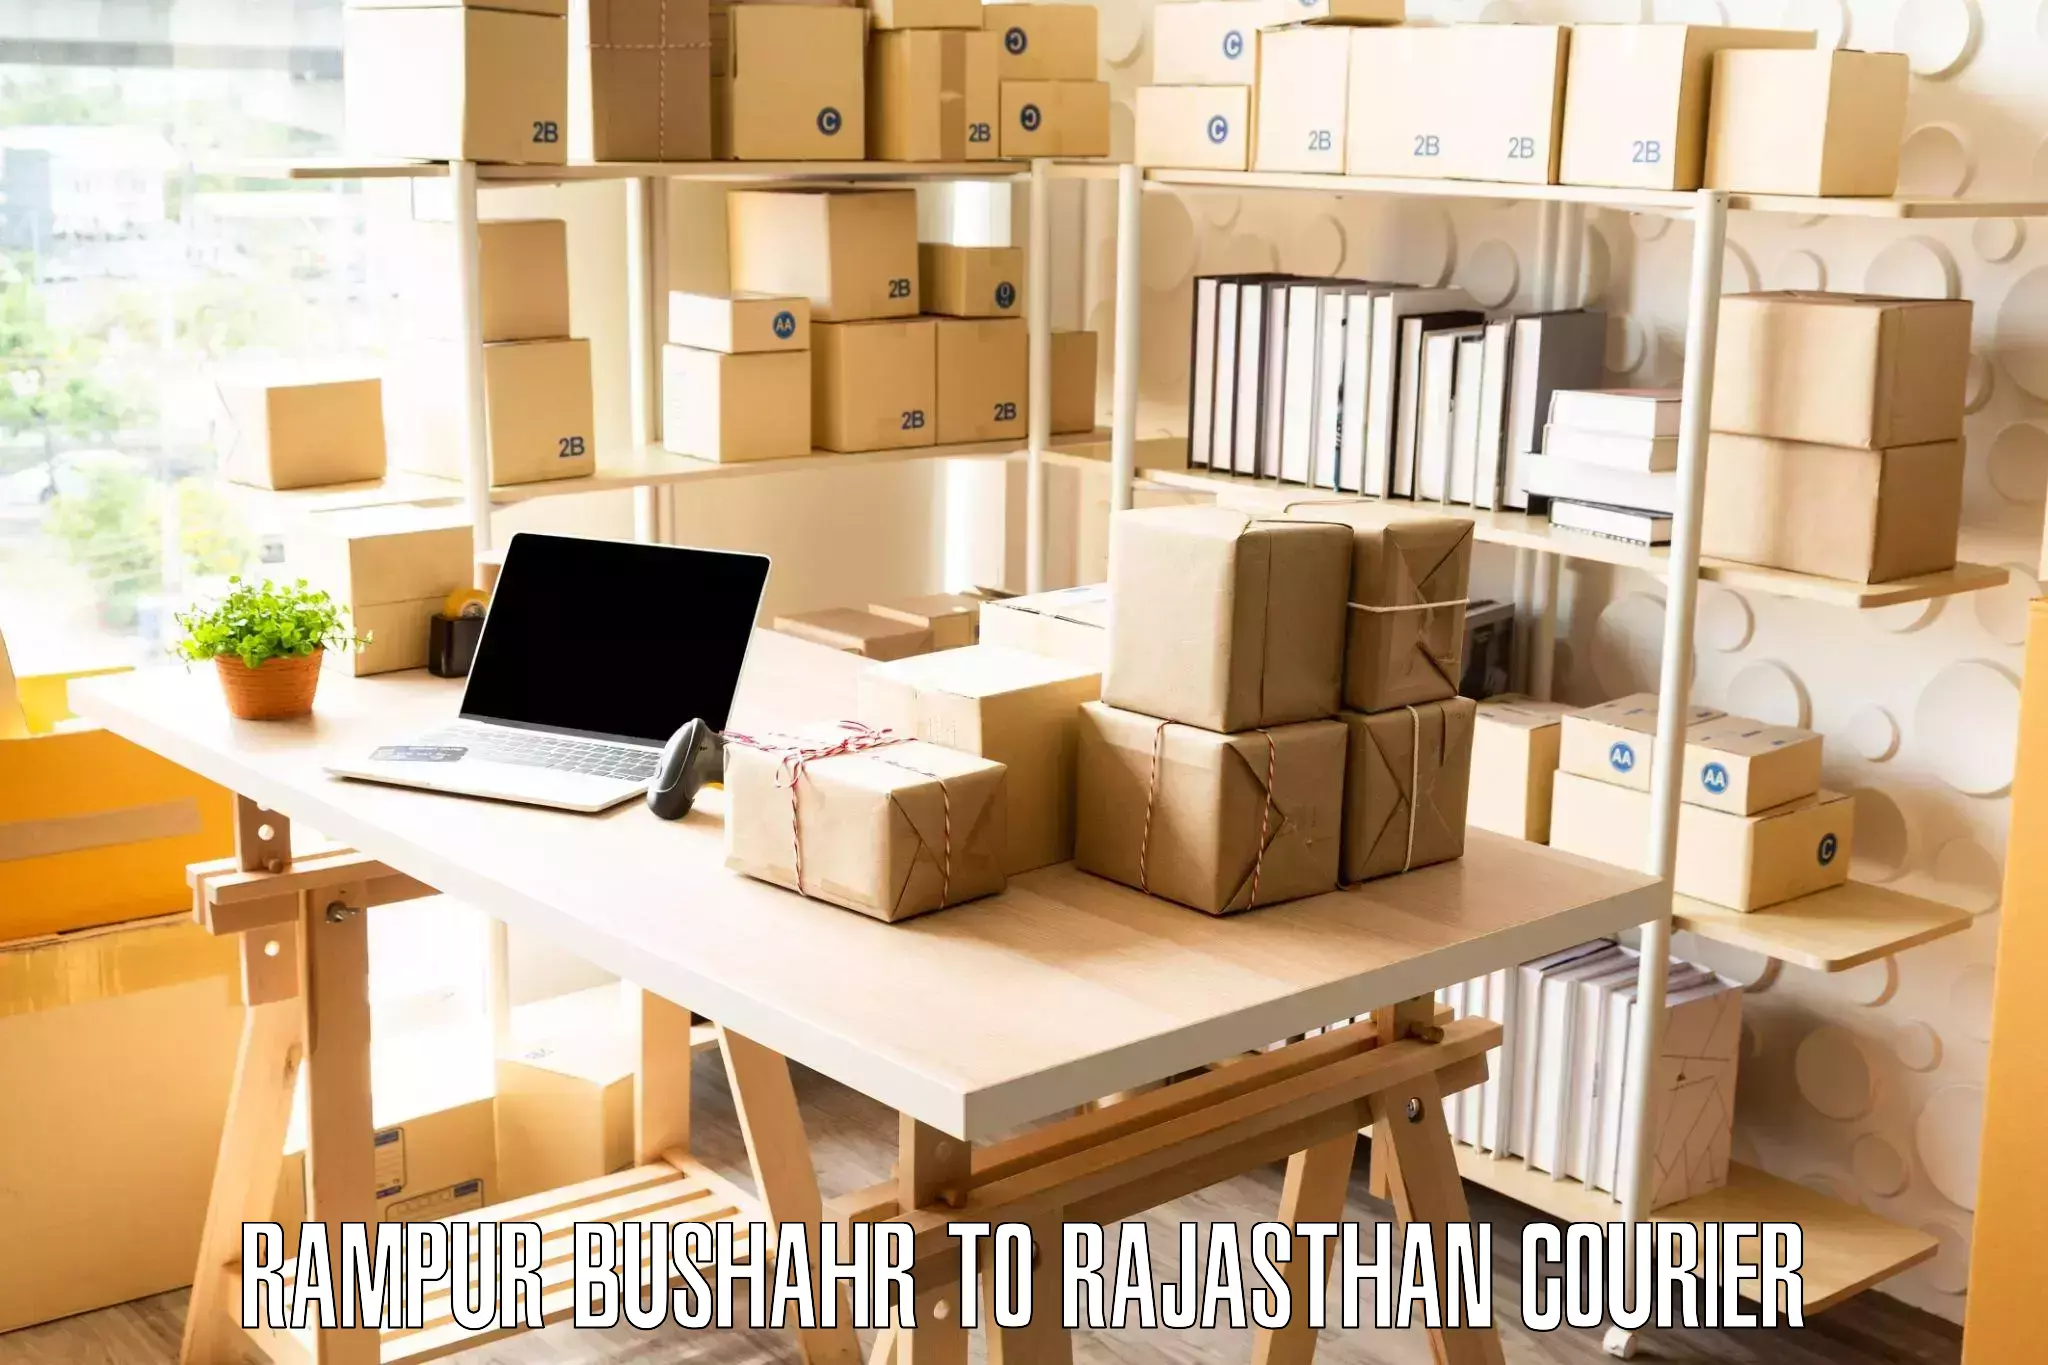 Quality moving services Rampur Bushahr to Bassi